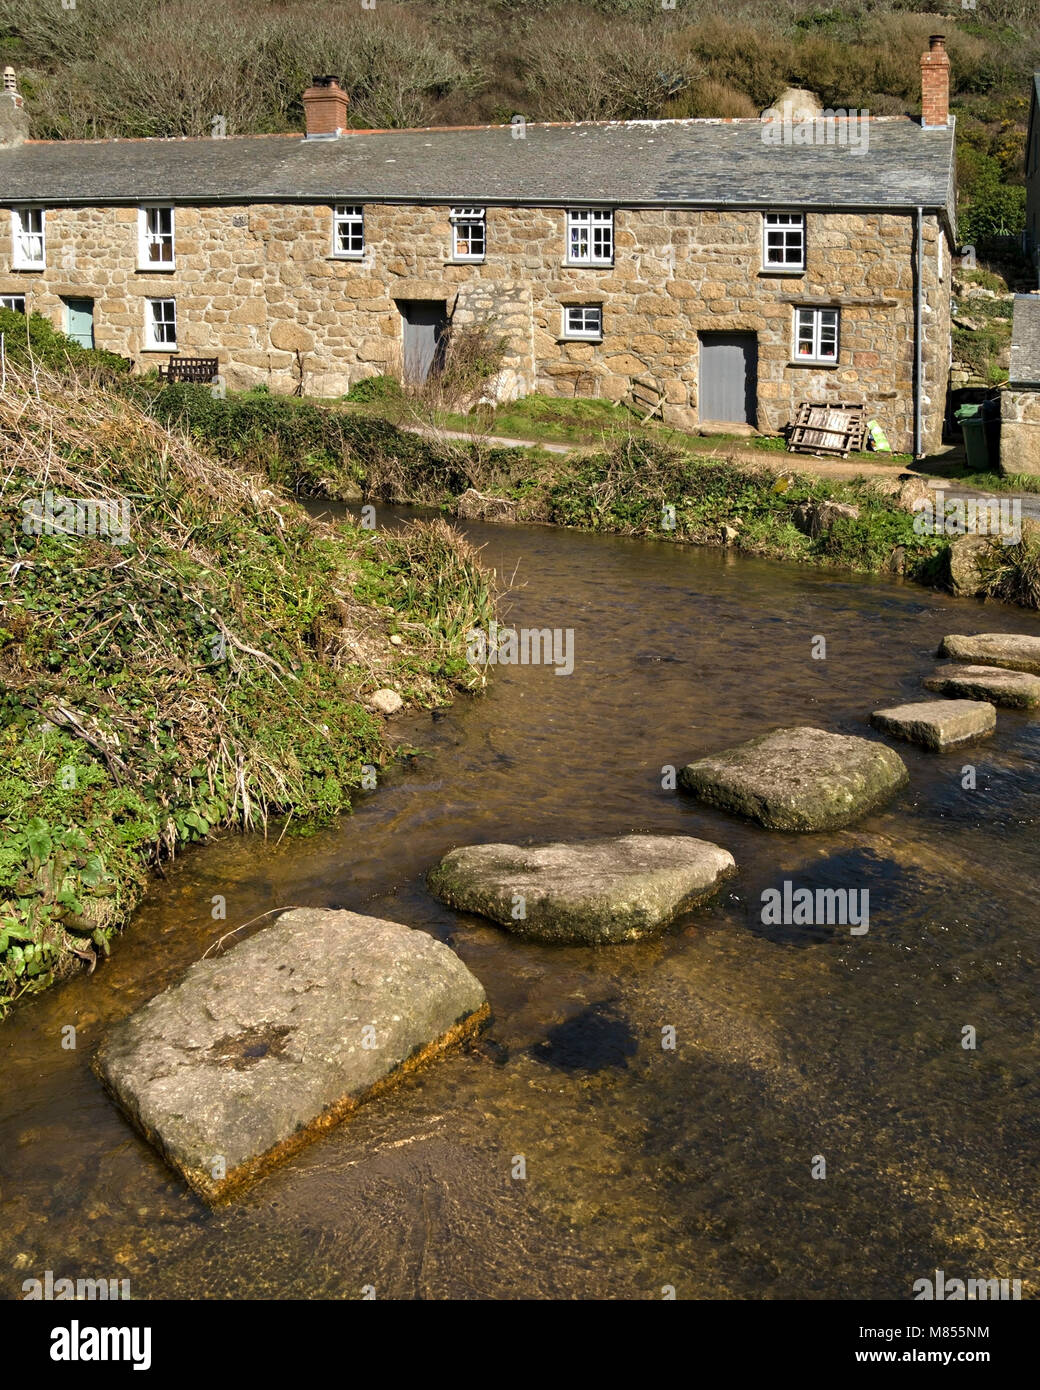 Old cottages and stepping stones across river at Penberth Cove, Cornwall, England, UK. Location was used during filming of Poldark TV series. Stock Photo